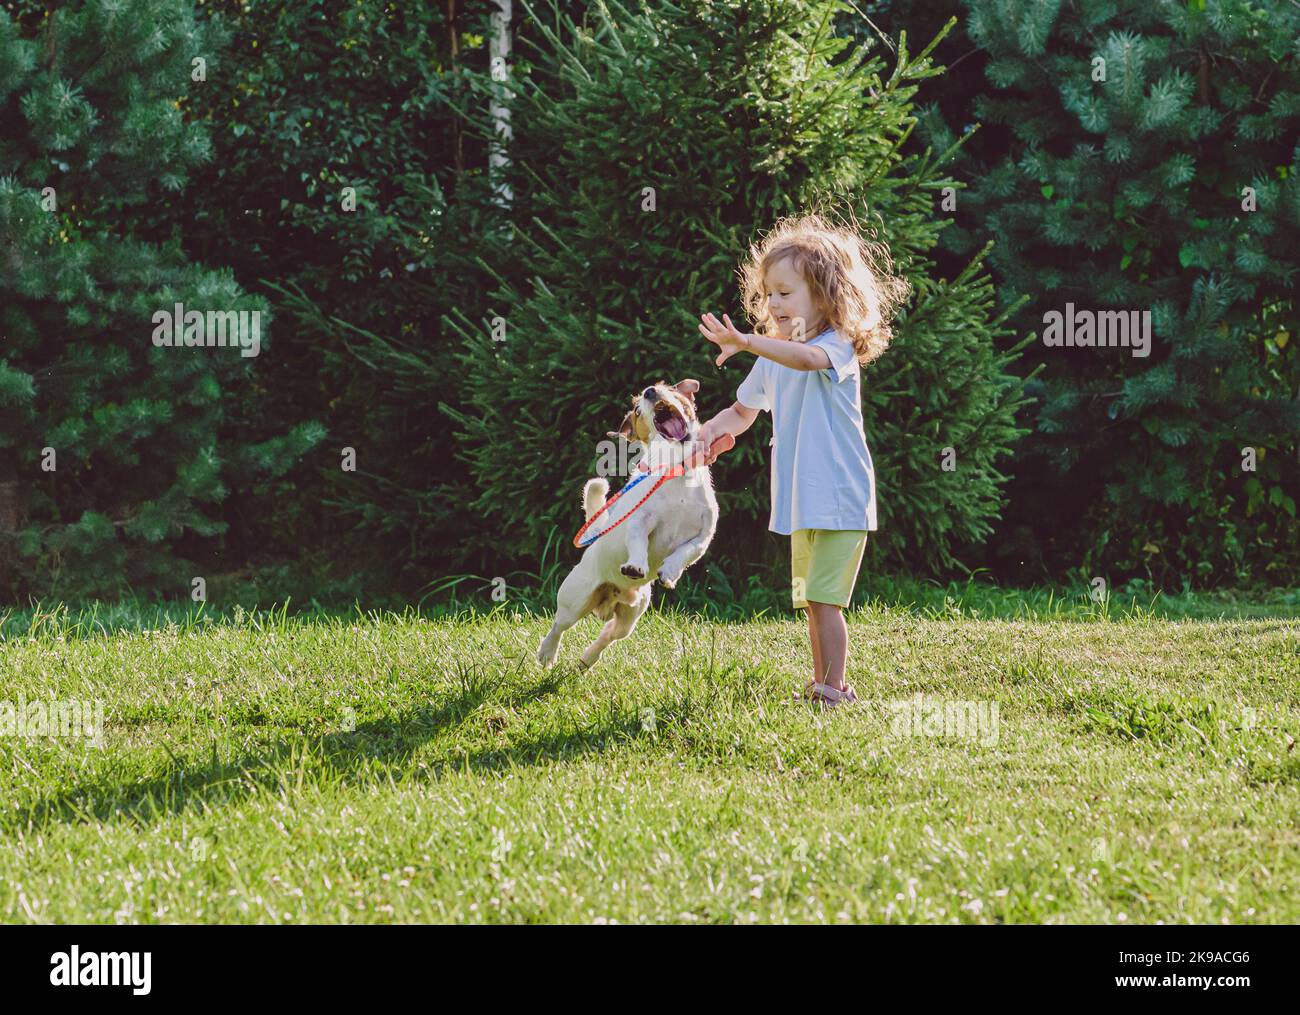 Children play badminton at backyard lawn and naughty family pet dog impedes game Stock Photo